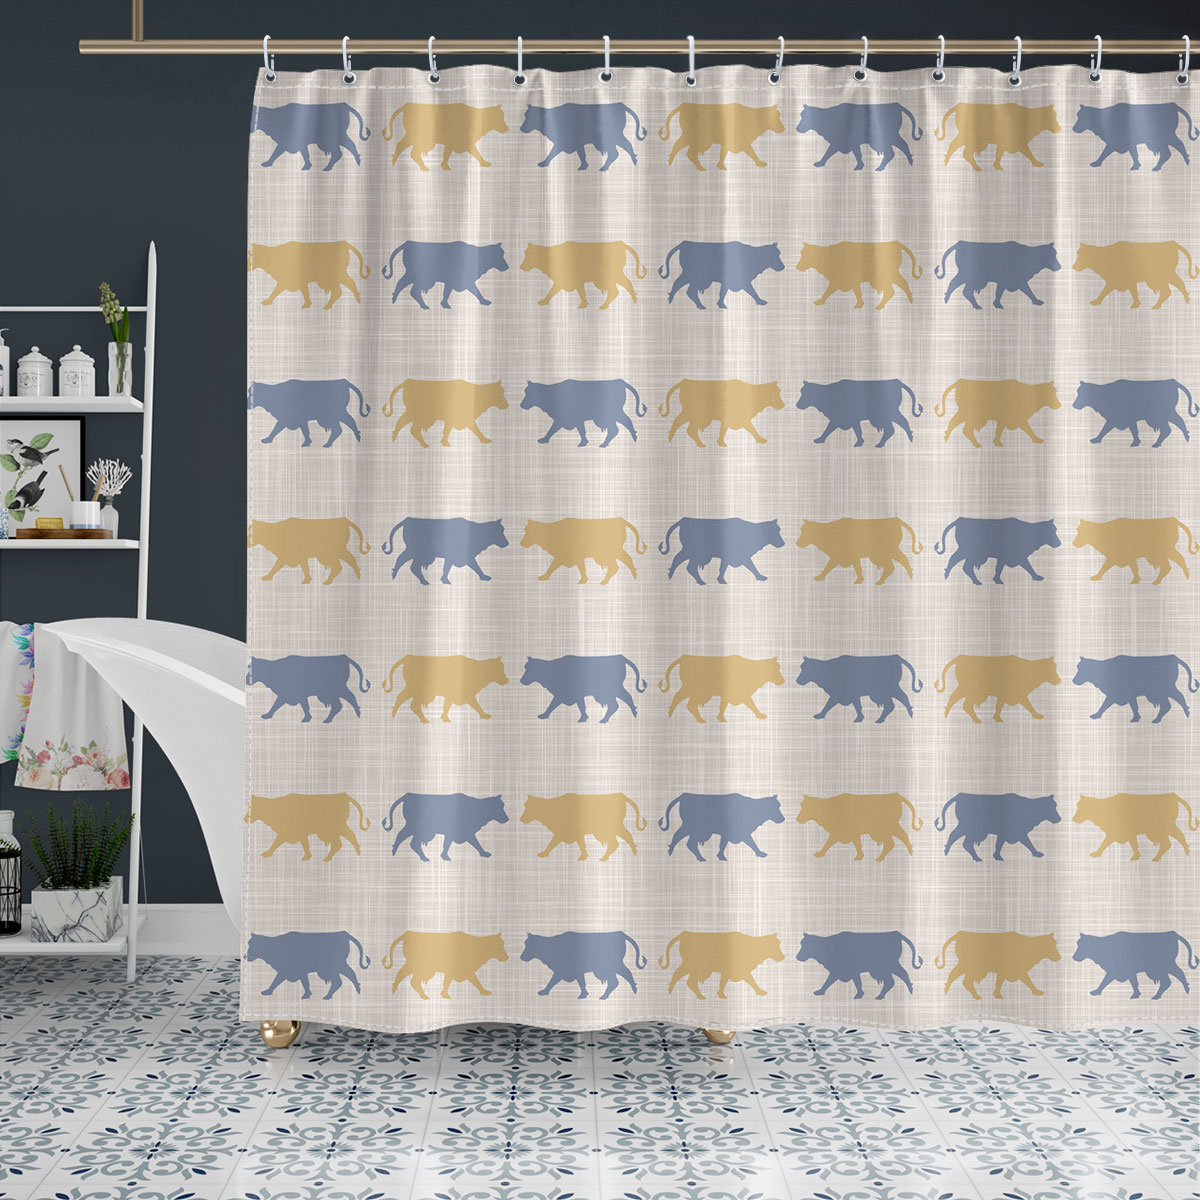 Cow Silhouette Pattern Shower Curtain